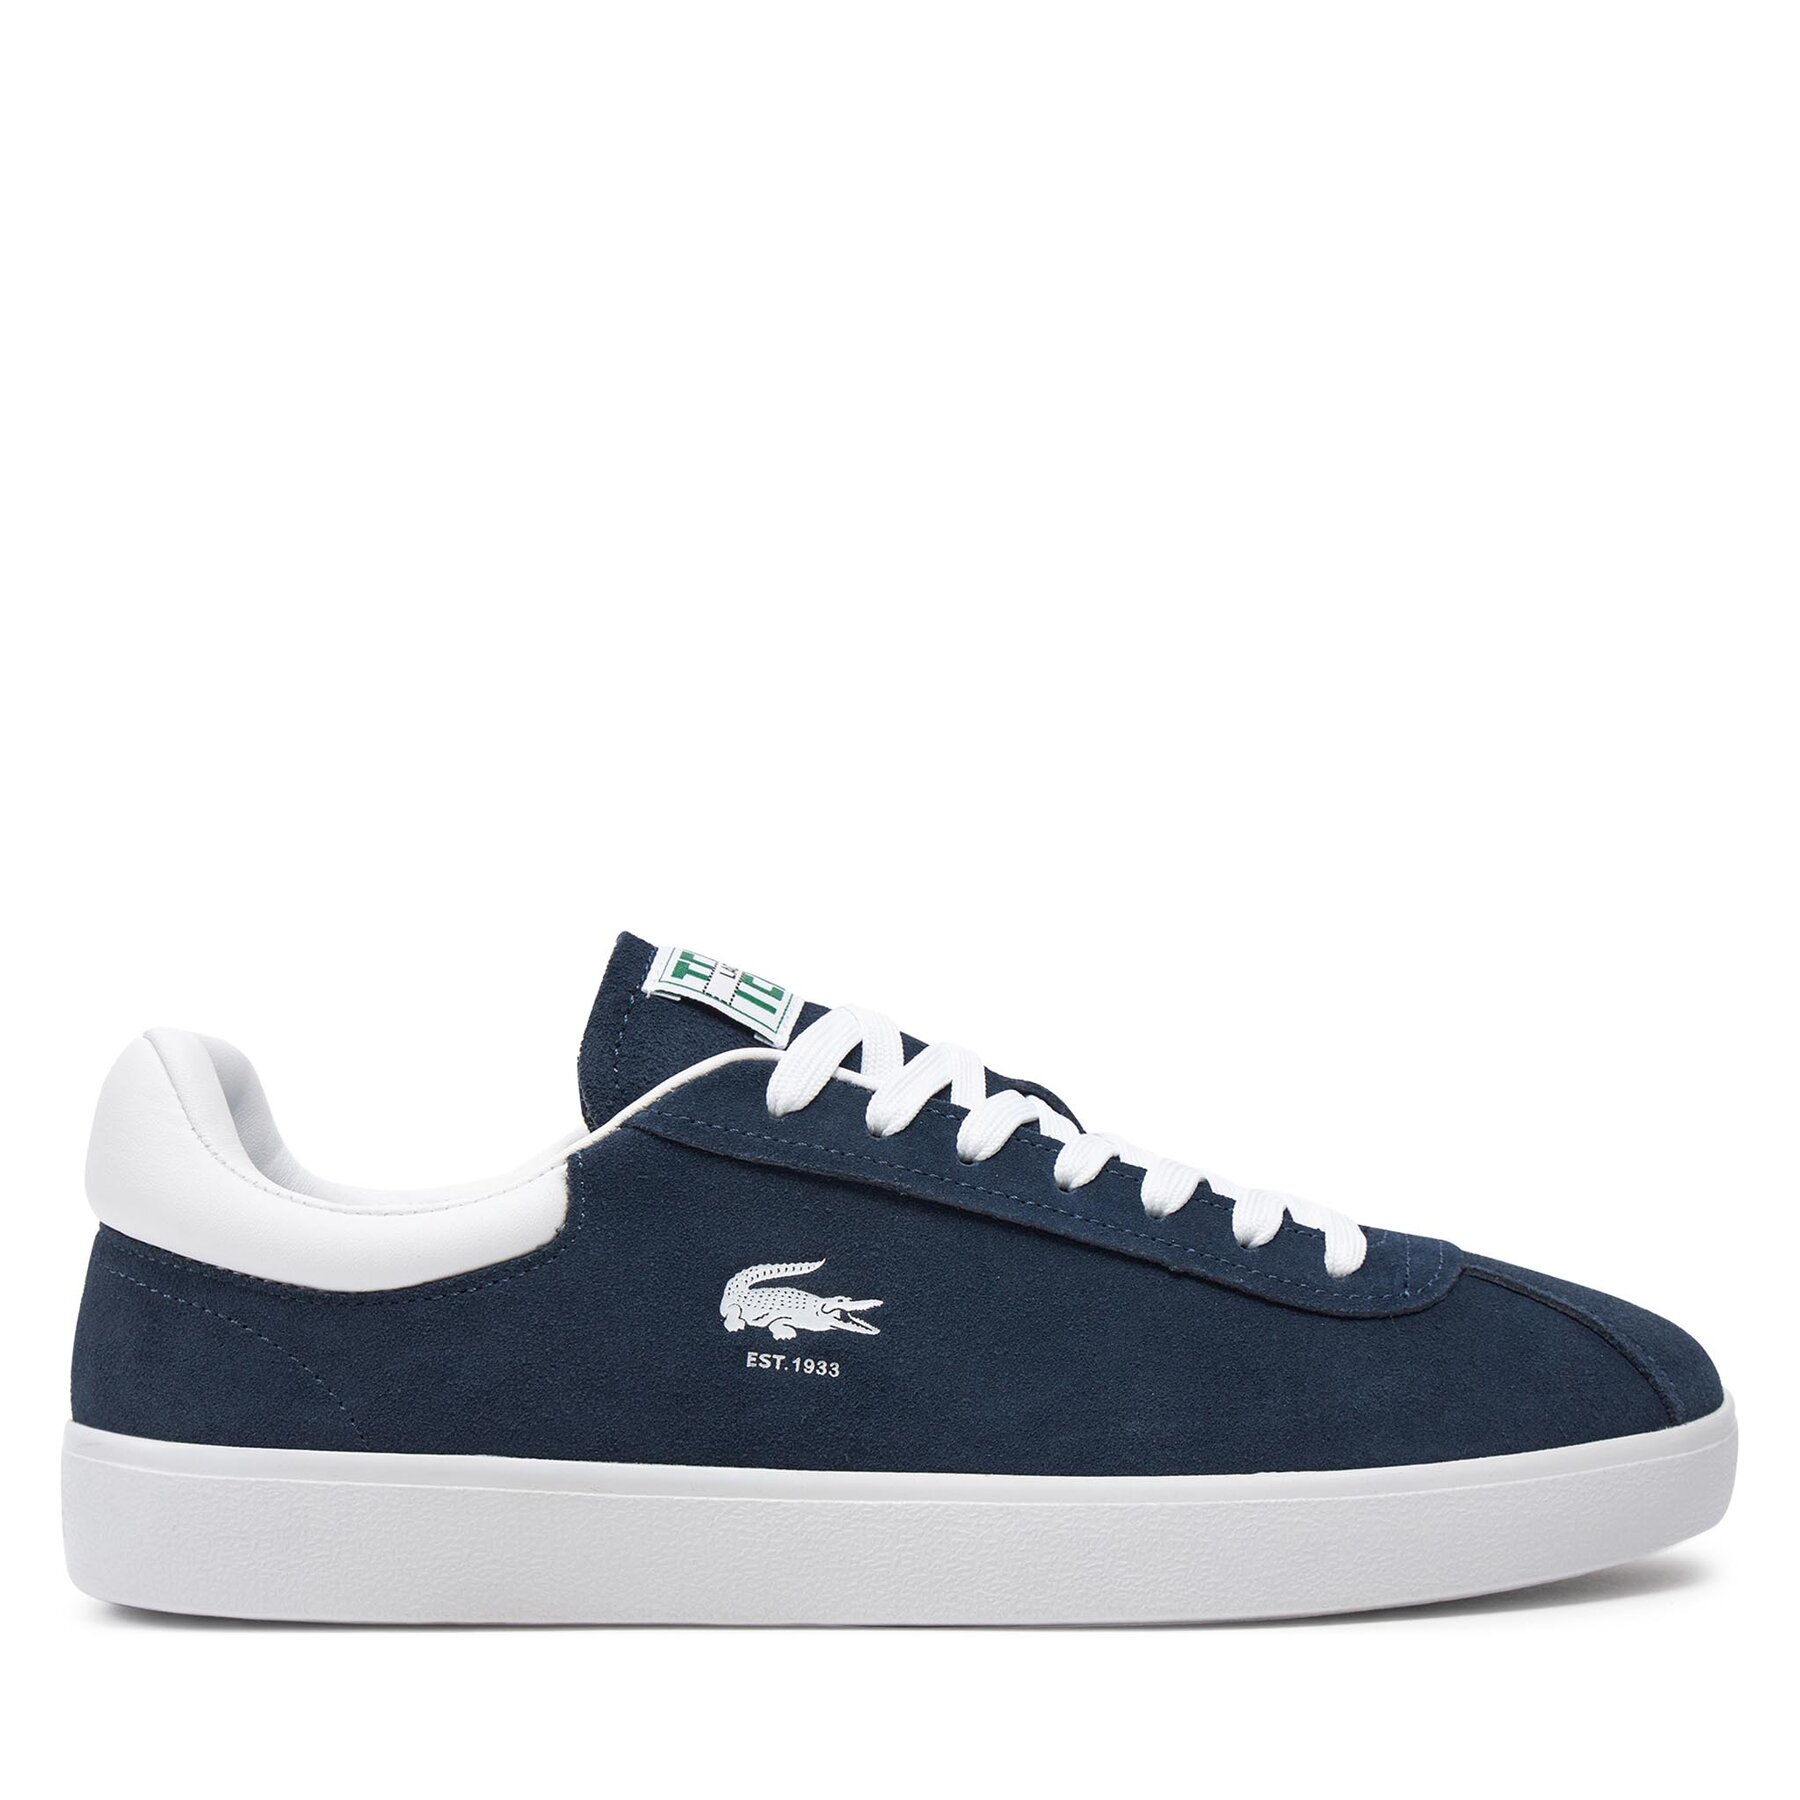 Sneakers Lacoste 746SMA0065 Nvy/Wht von Lacoste